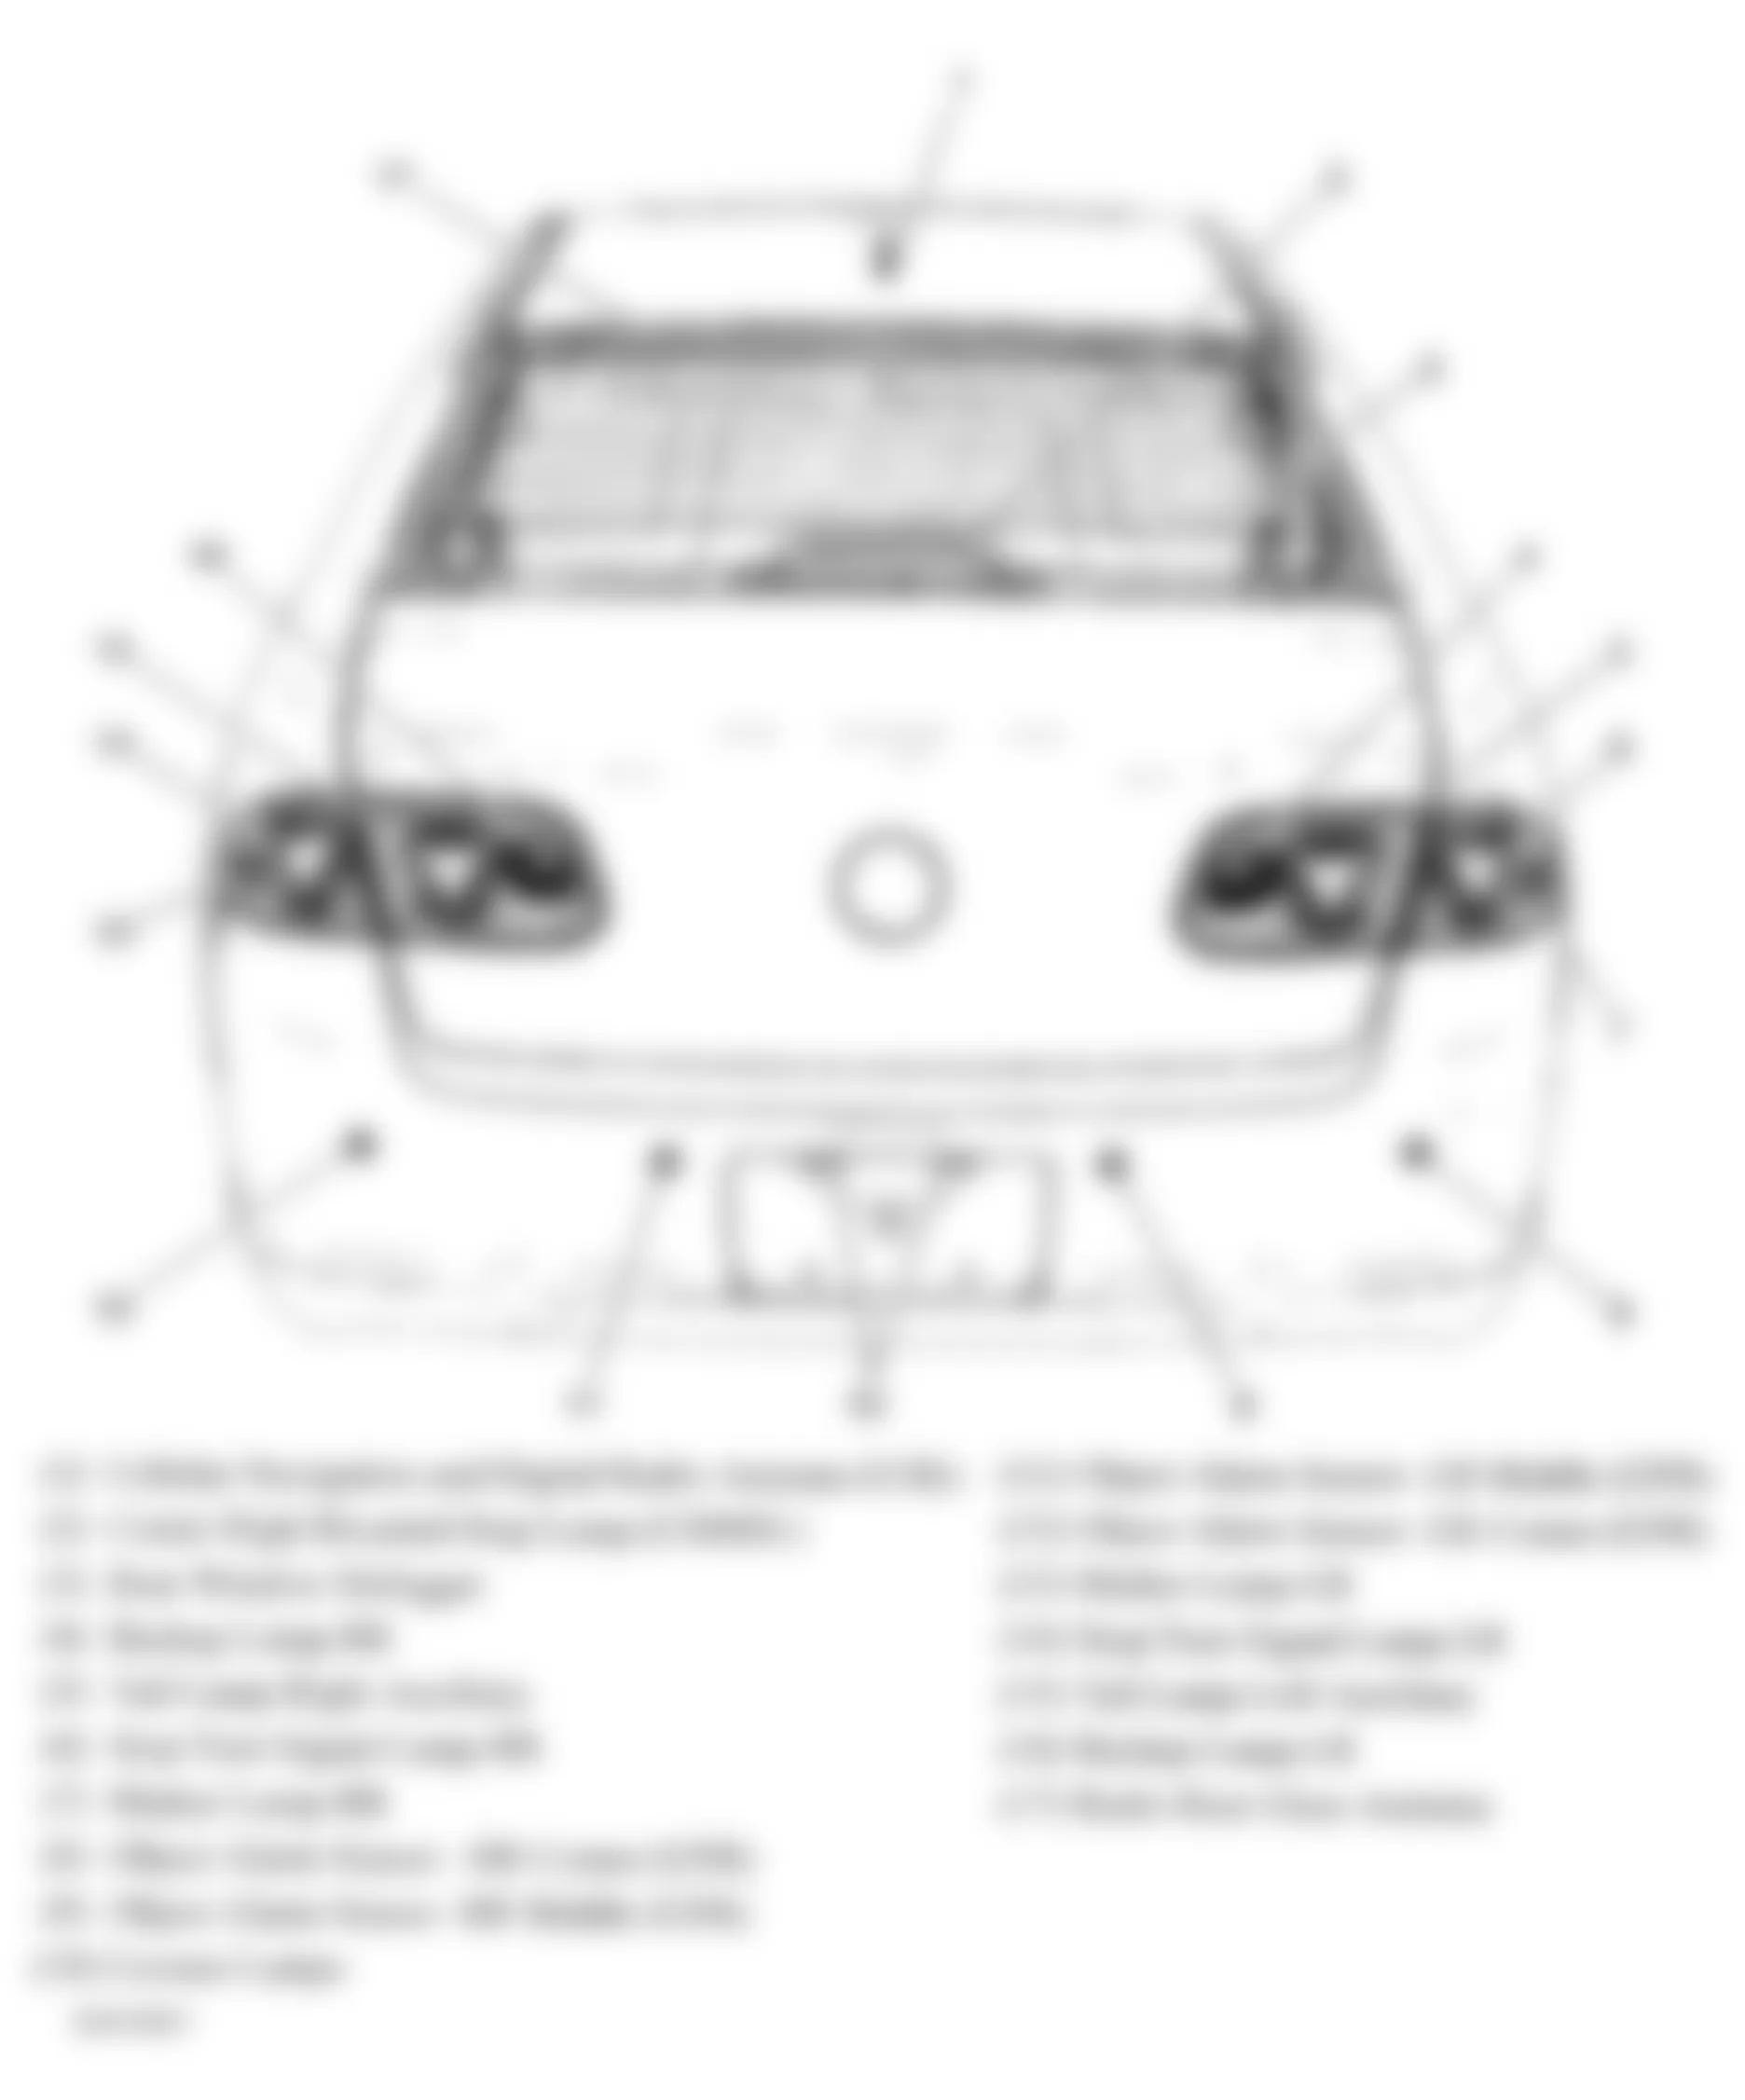 Buick Lucerne Super 2009 - Component Locations -  Rear Of Vehicle